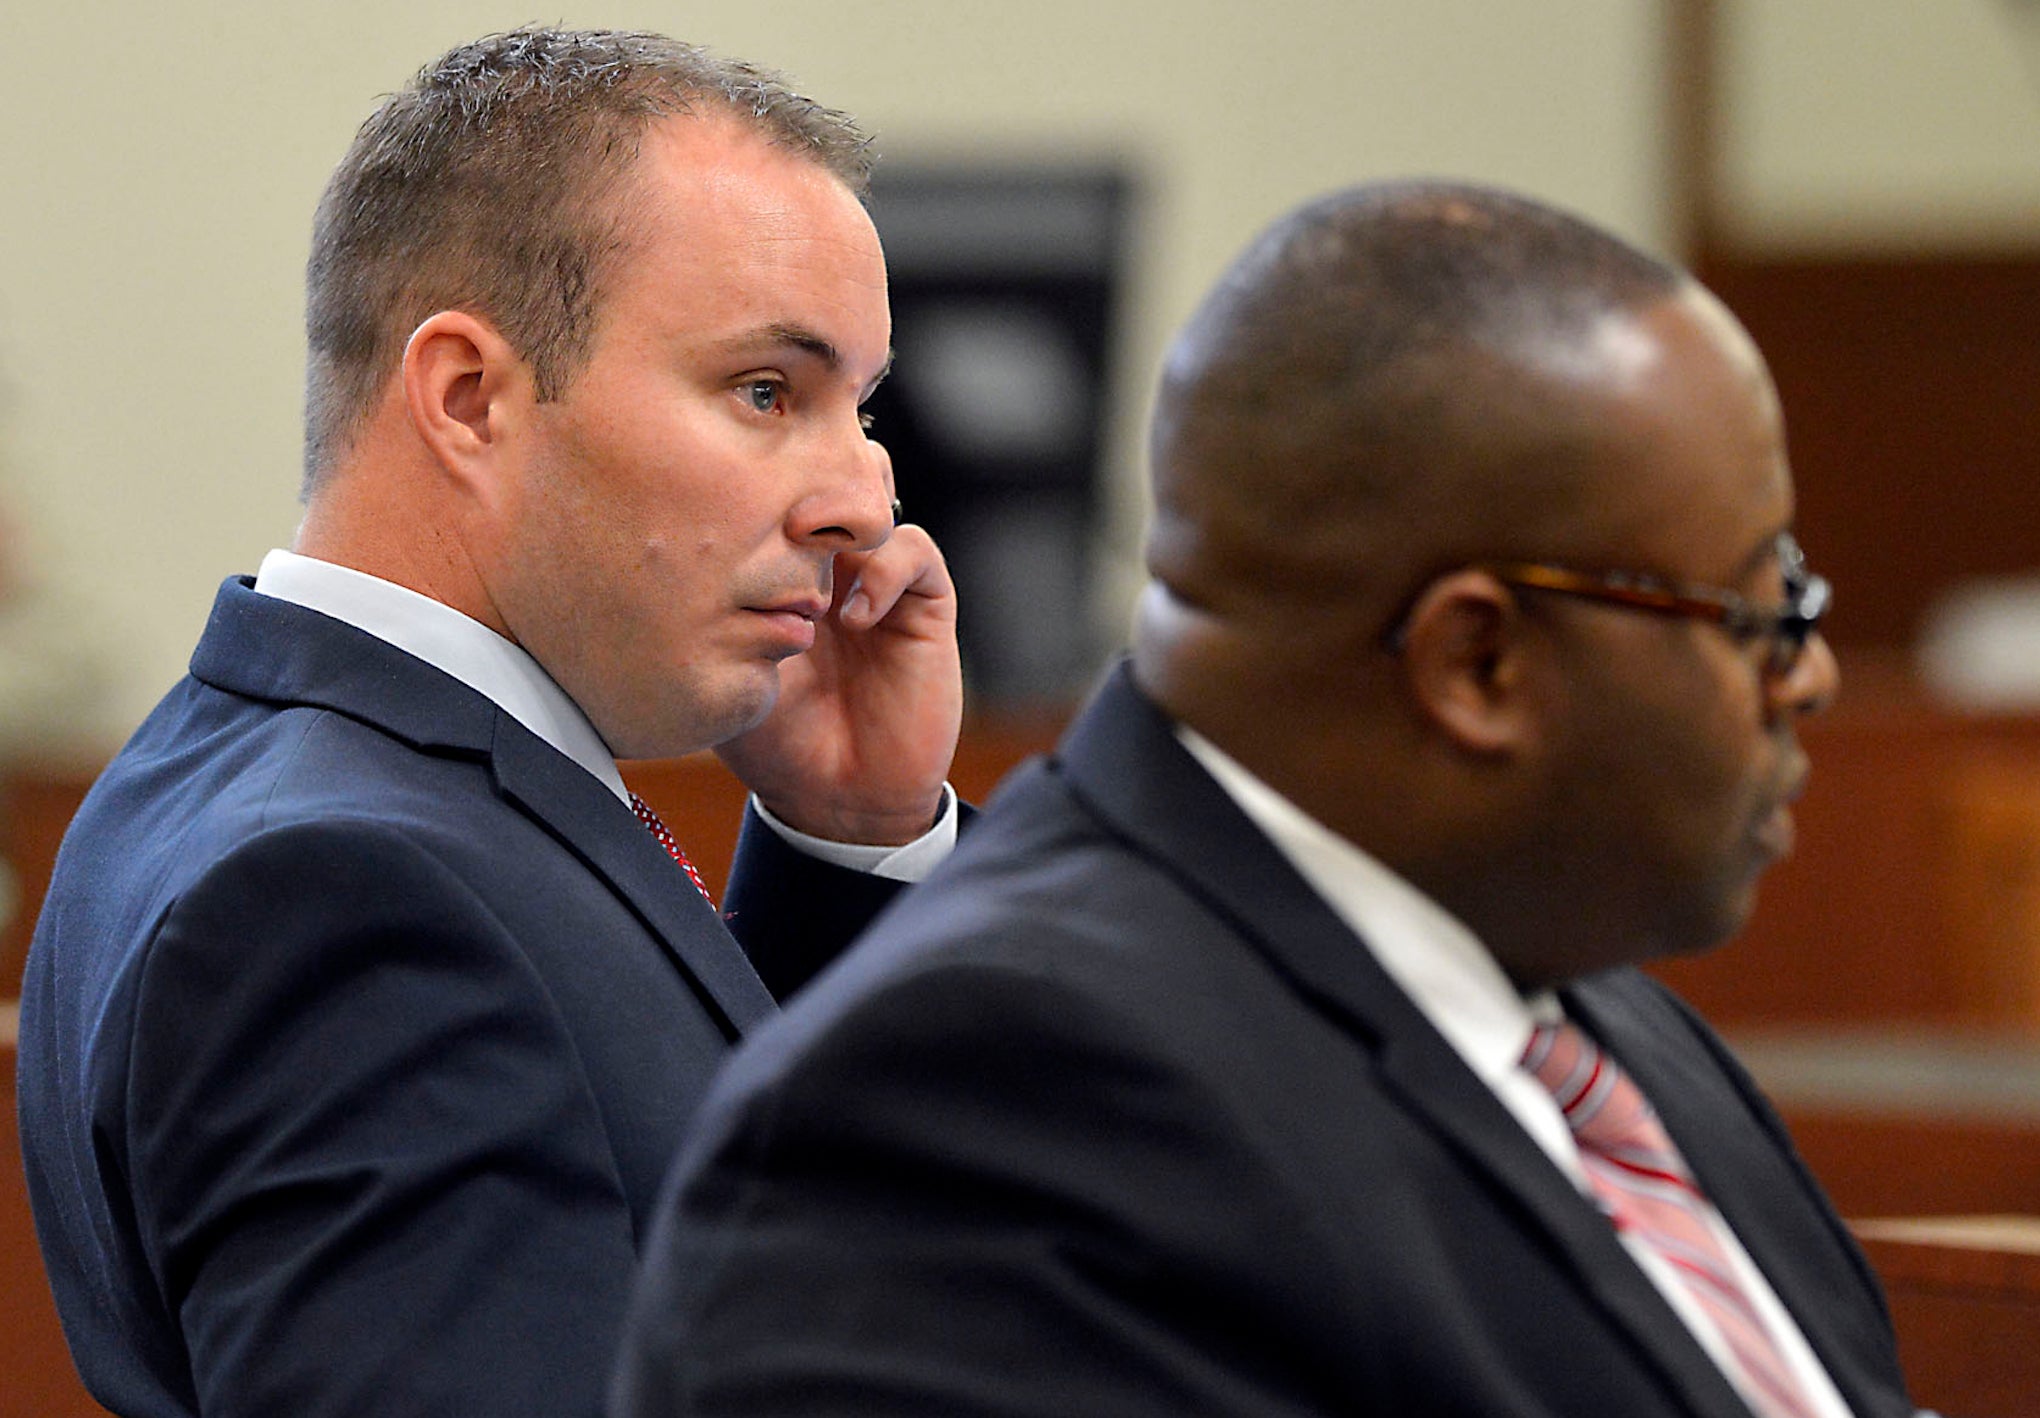 Randall Kerrick, left, and his attorney Michael Greene listen to opening arguments at the Mecklenburg County Courthouse in Charlotte, North Carolina.